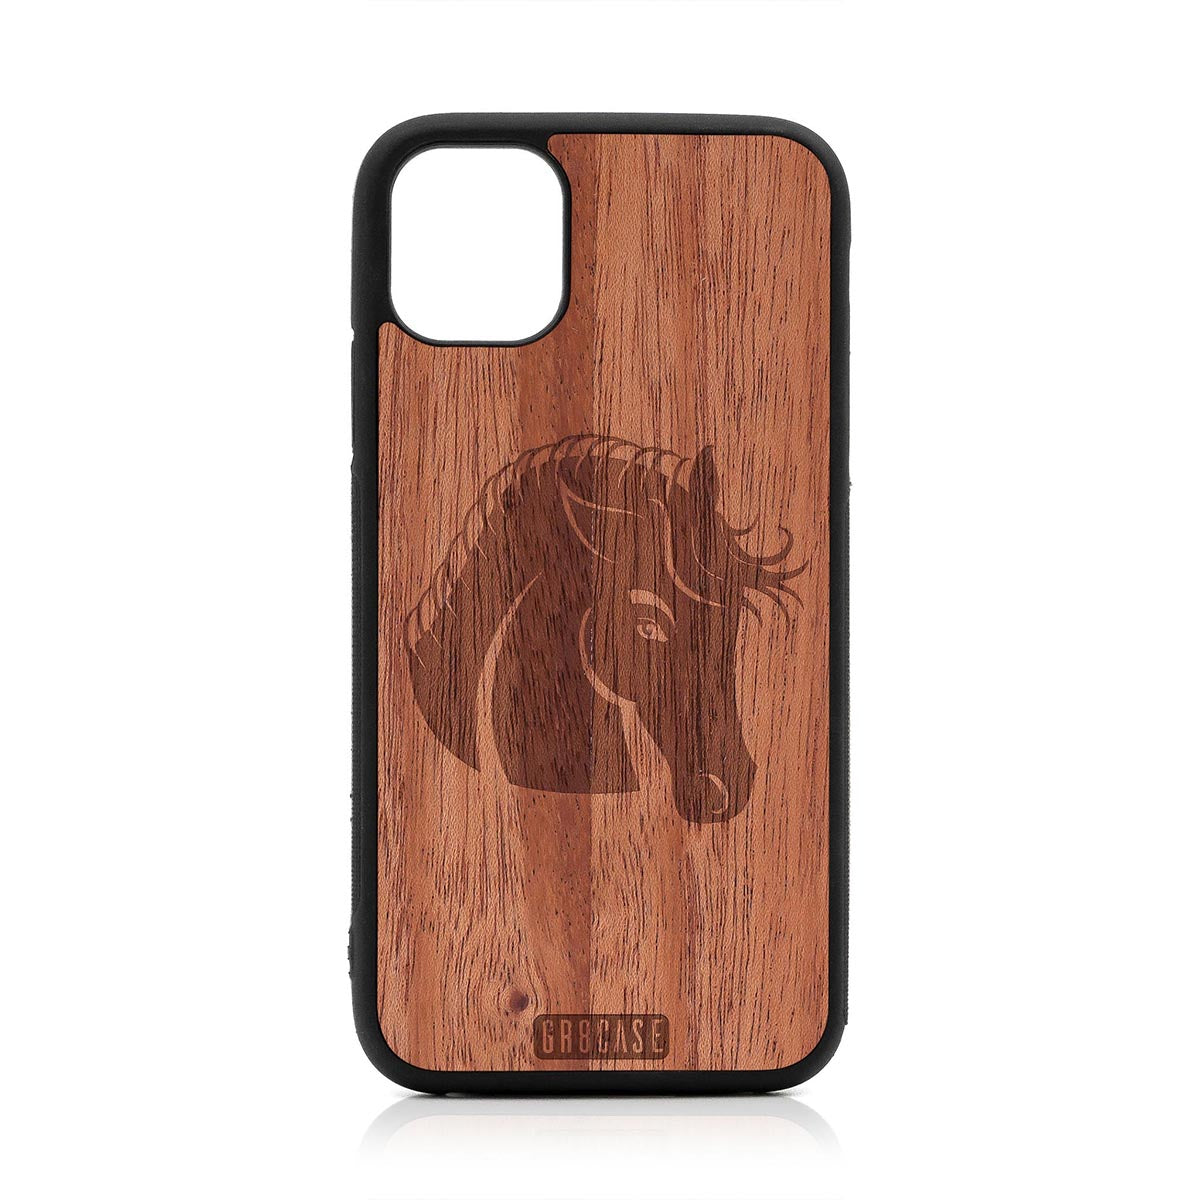 Horse Design Wood Case For iPhone 11 by GR8CASE